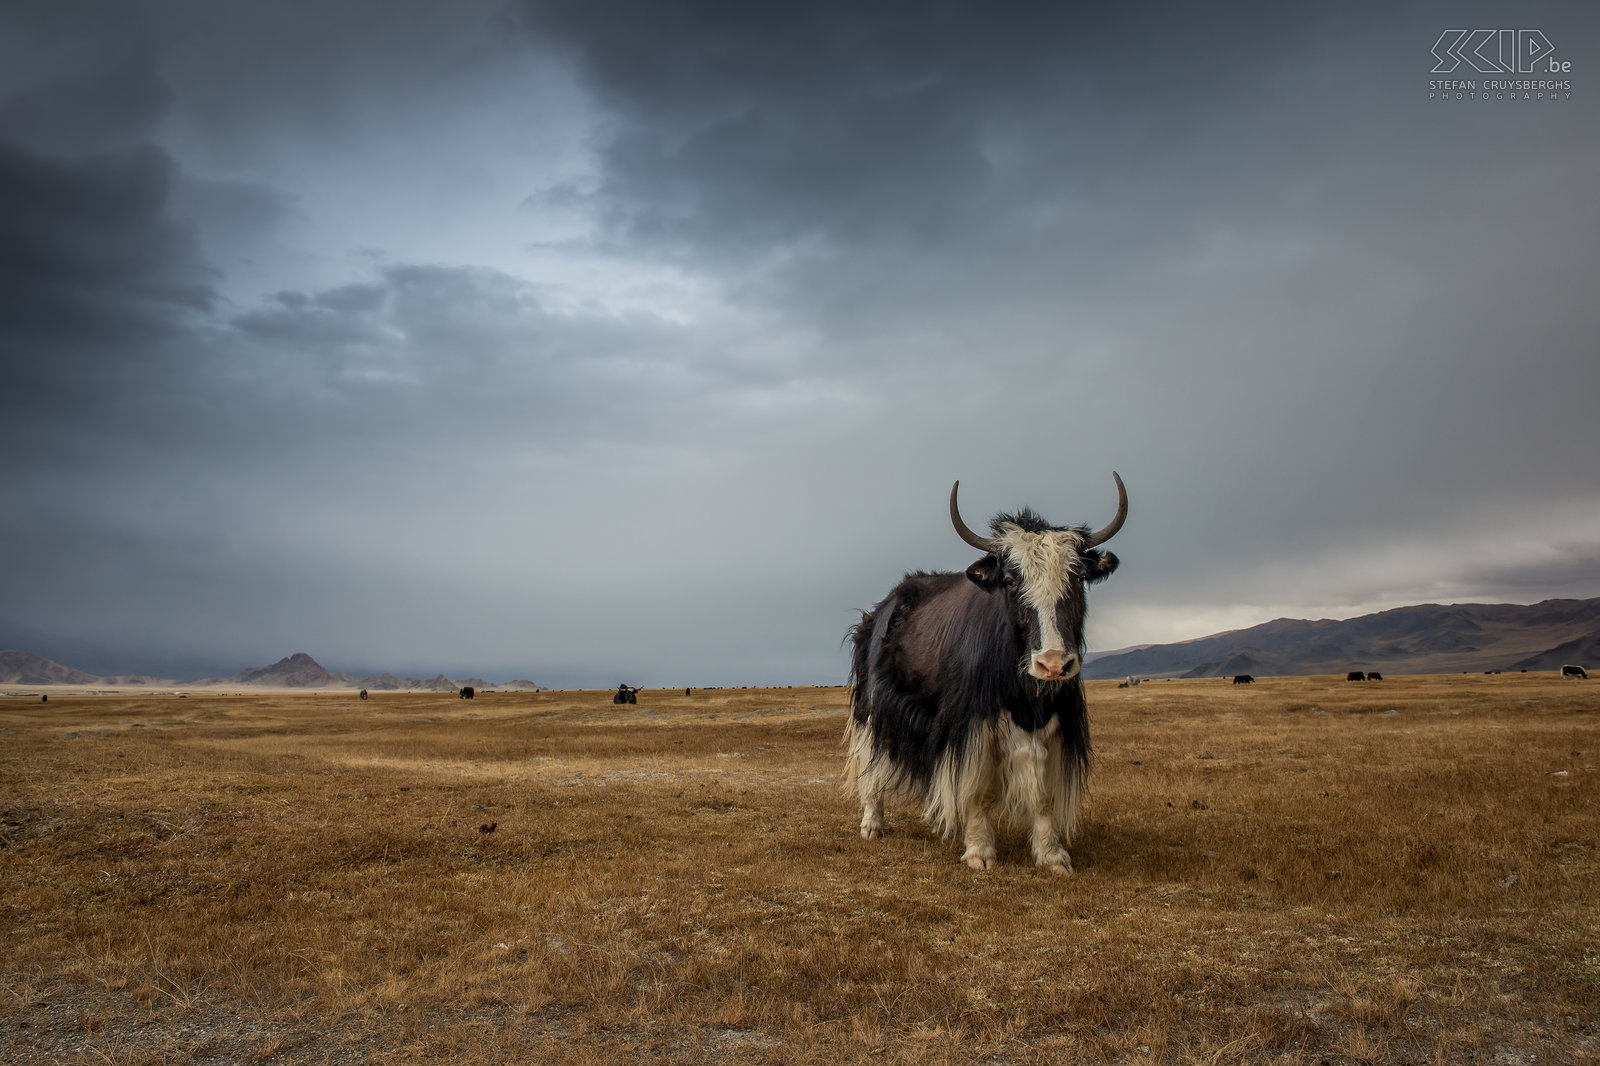 Altai - Yak Domesticated yaks (Bos grunniens) have a long fur and can stand the cold. Males can have horns of 50 to 100cm in length and they can weigh up to 400kg. Stefan Cruysberghs